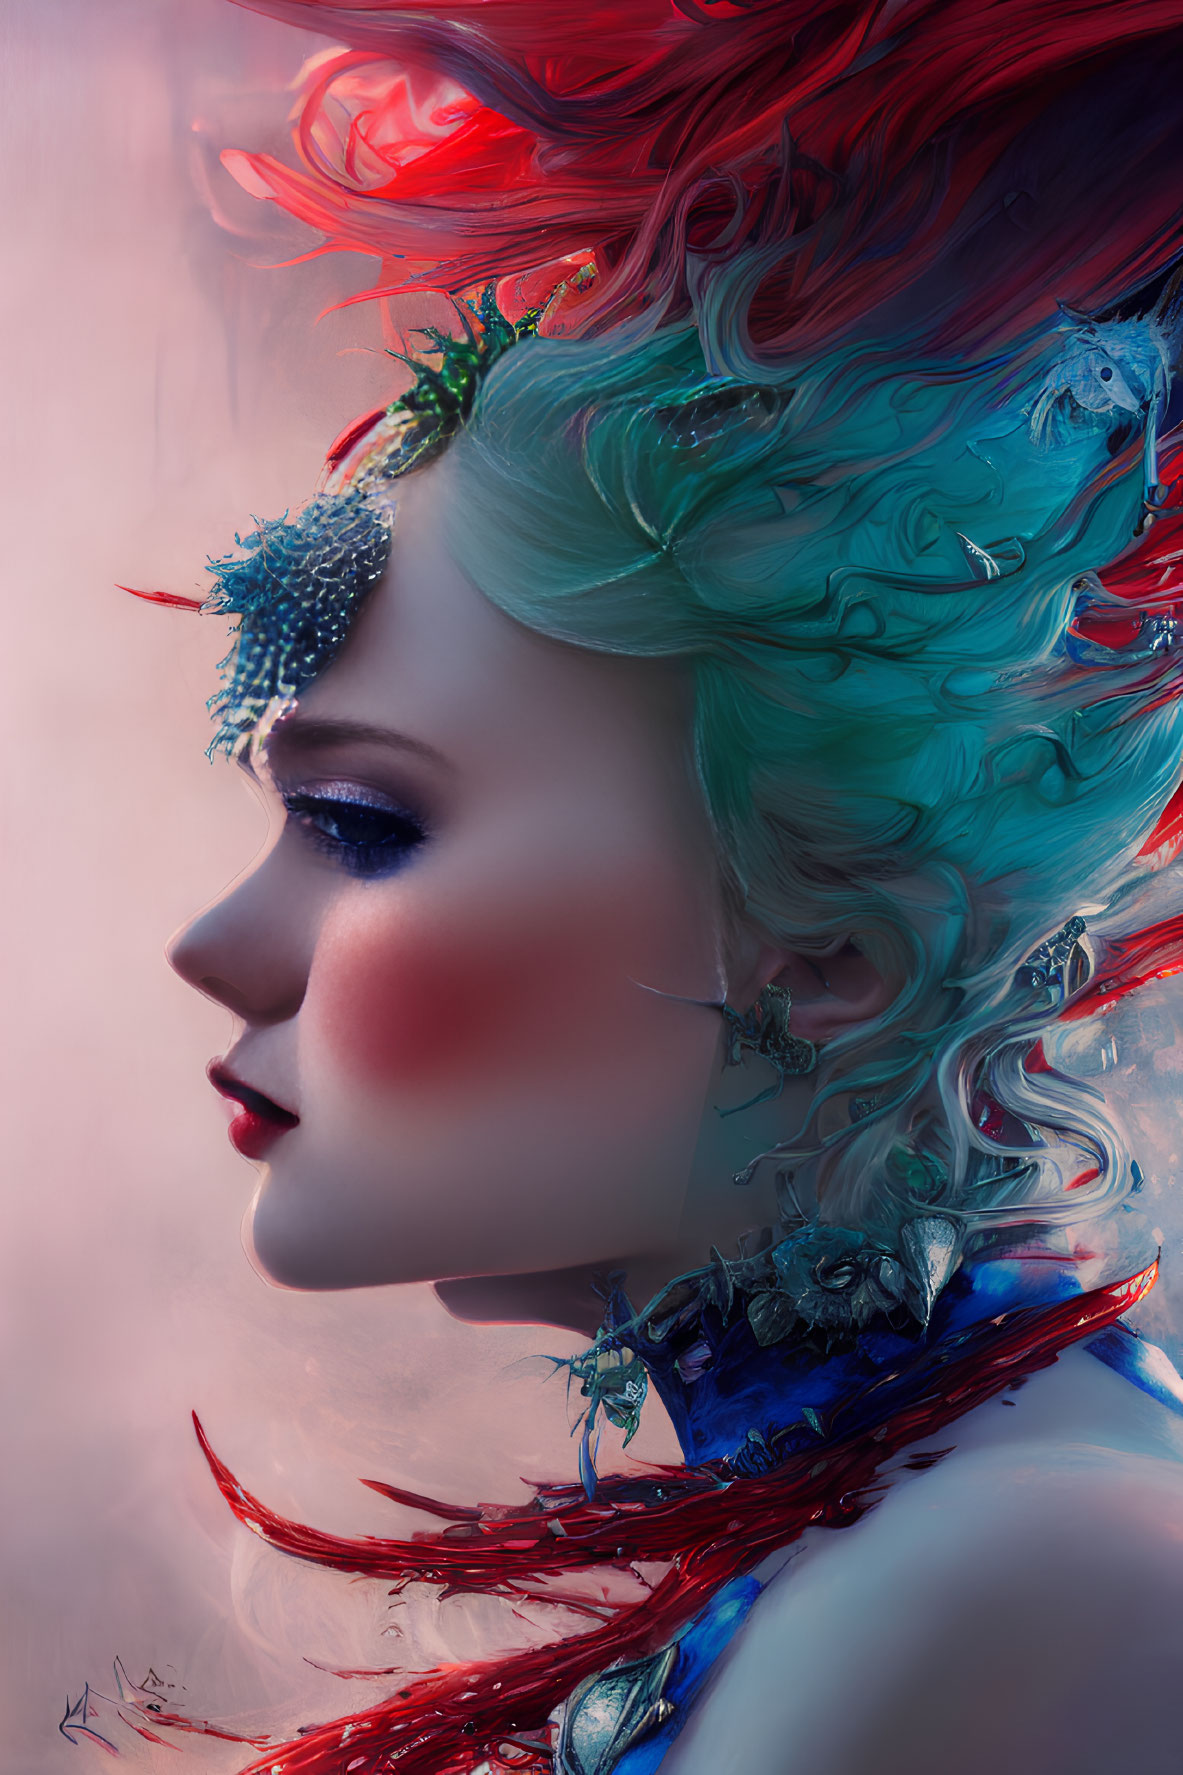 Colorful digital artwork featuring person with blue and red hair and exotic creatures.